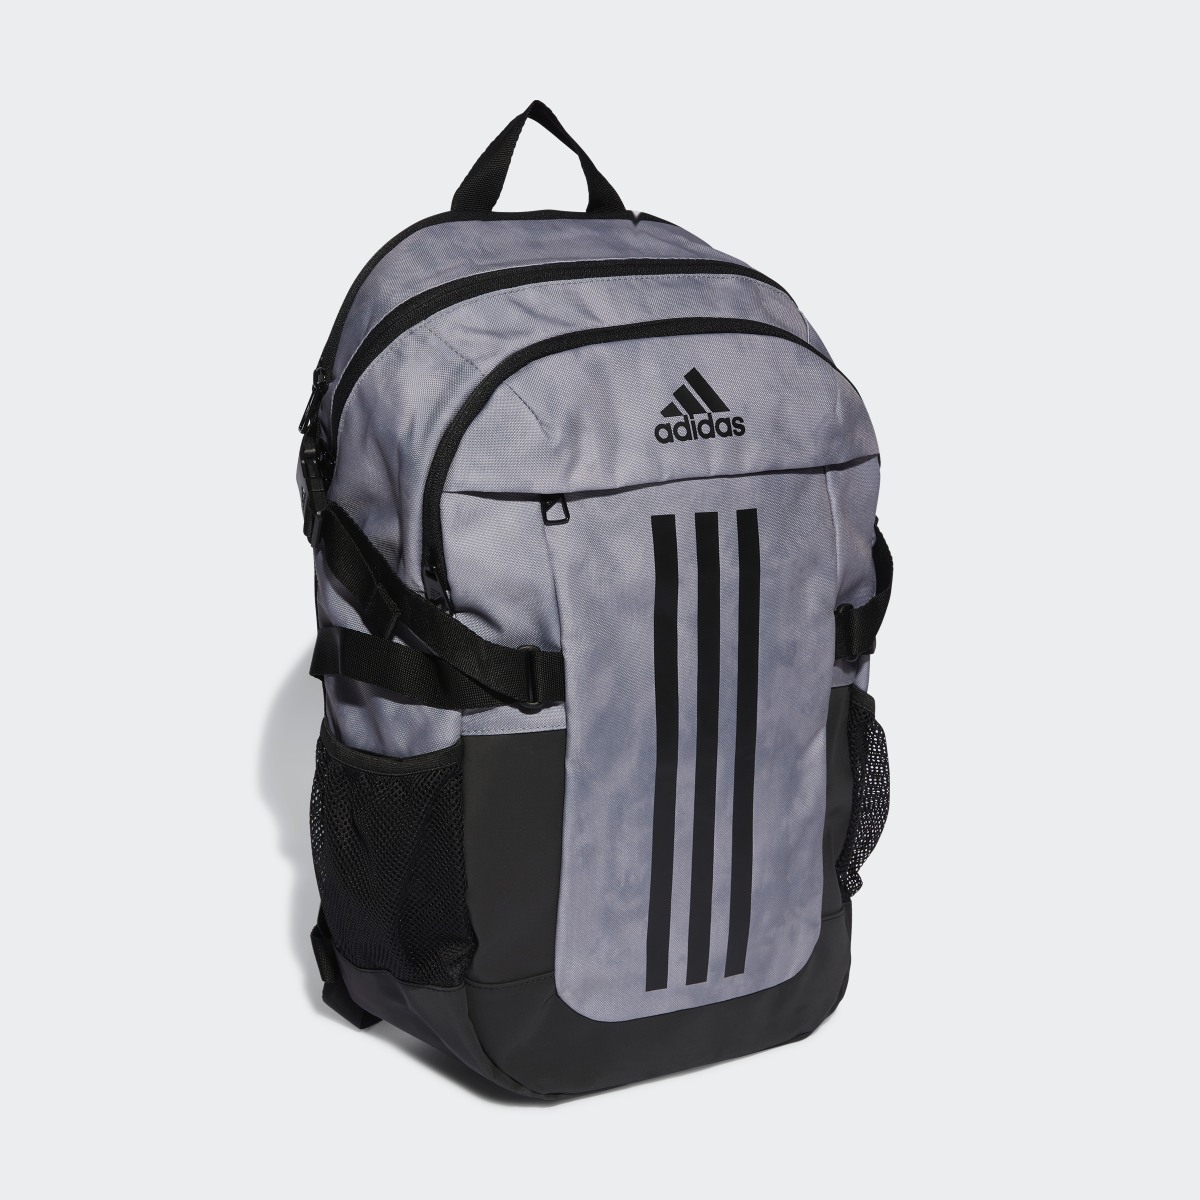 Adidas Power VI Graphic Backpack. 4